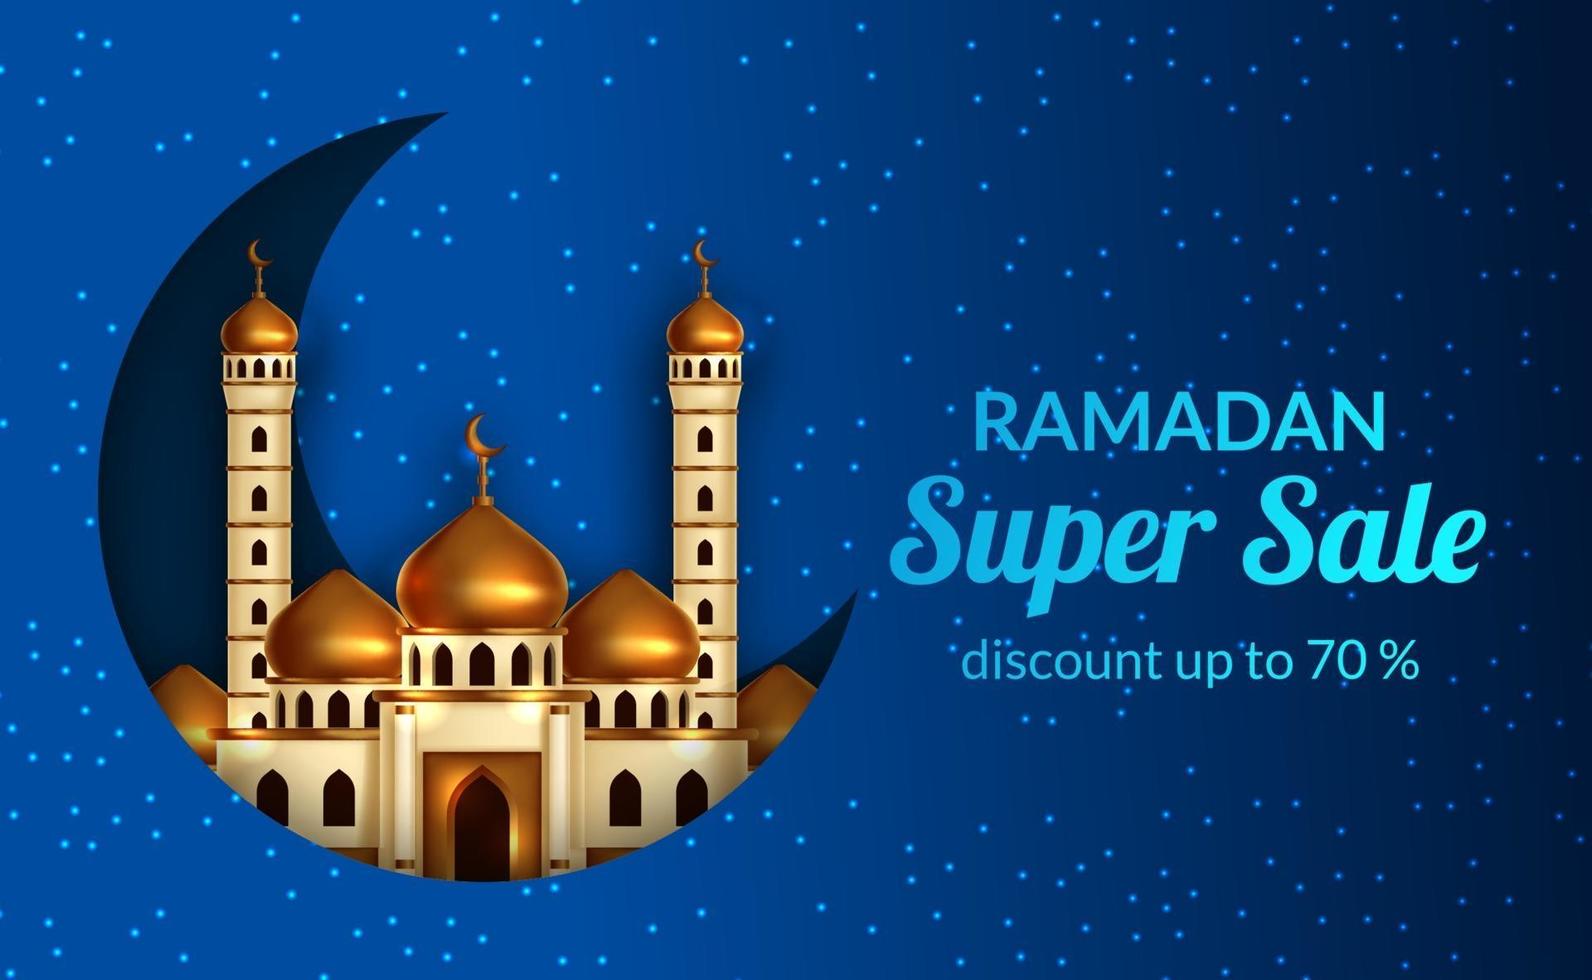 Ramadan sale offer banner template with illustration of golden dome mosque with crescent and blue light background vector